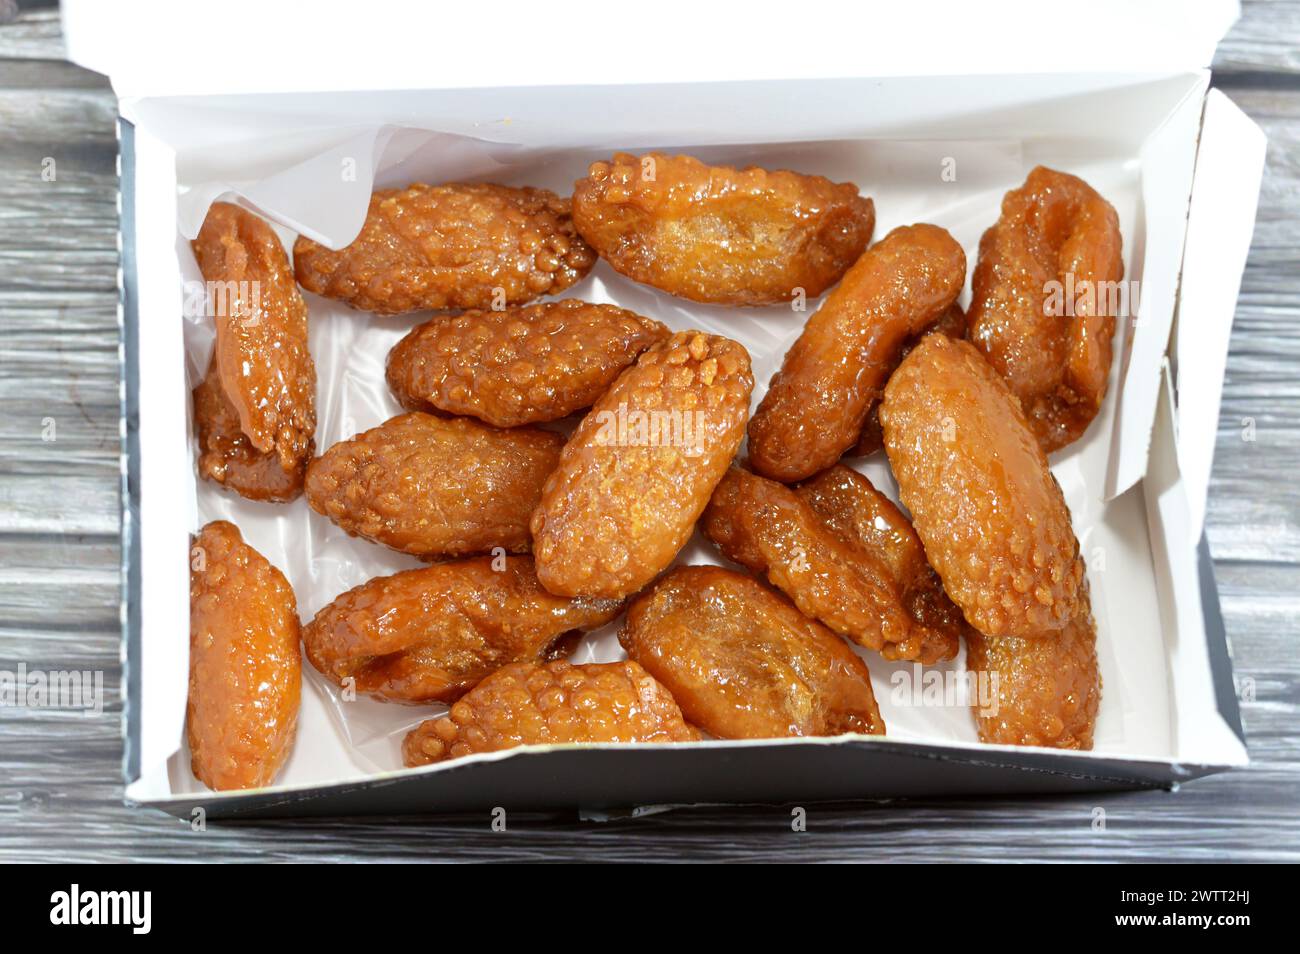 Egyptian Zainab fingers or glazed anise fingers, flour with semolina in the form of fingers that are crunchy on the outside and very soft on the insid Stock Photo